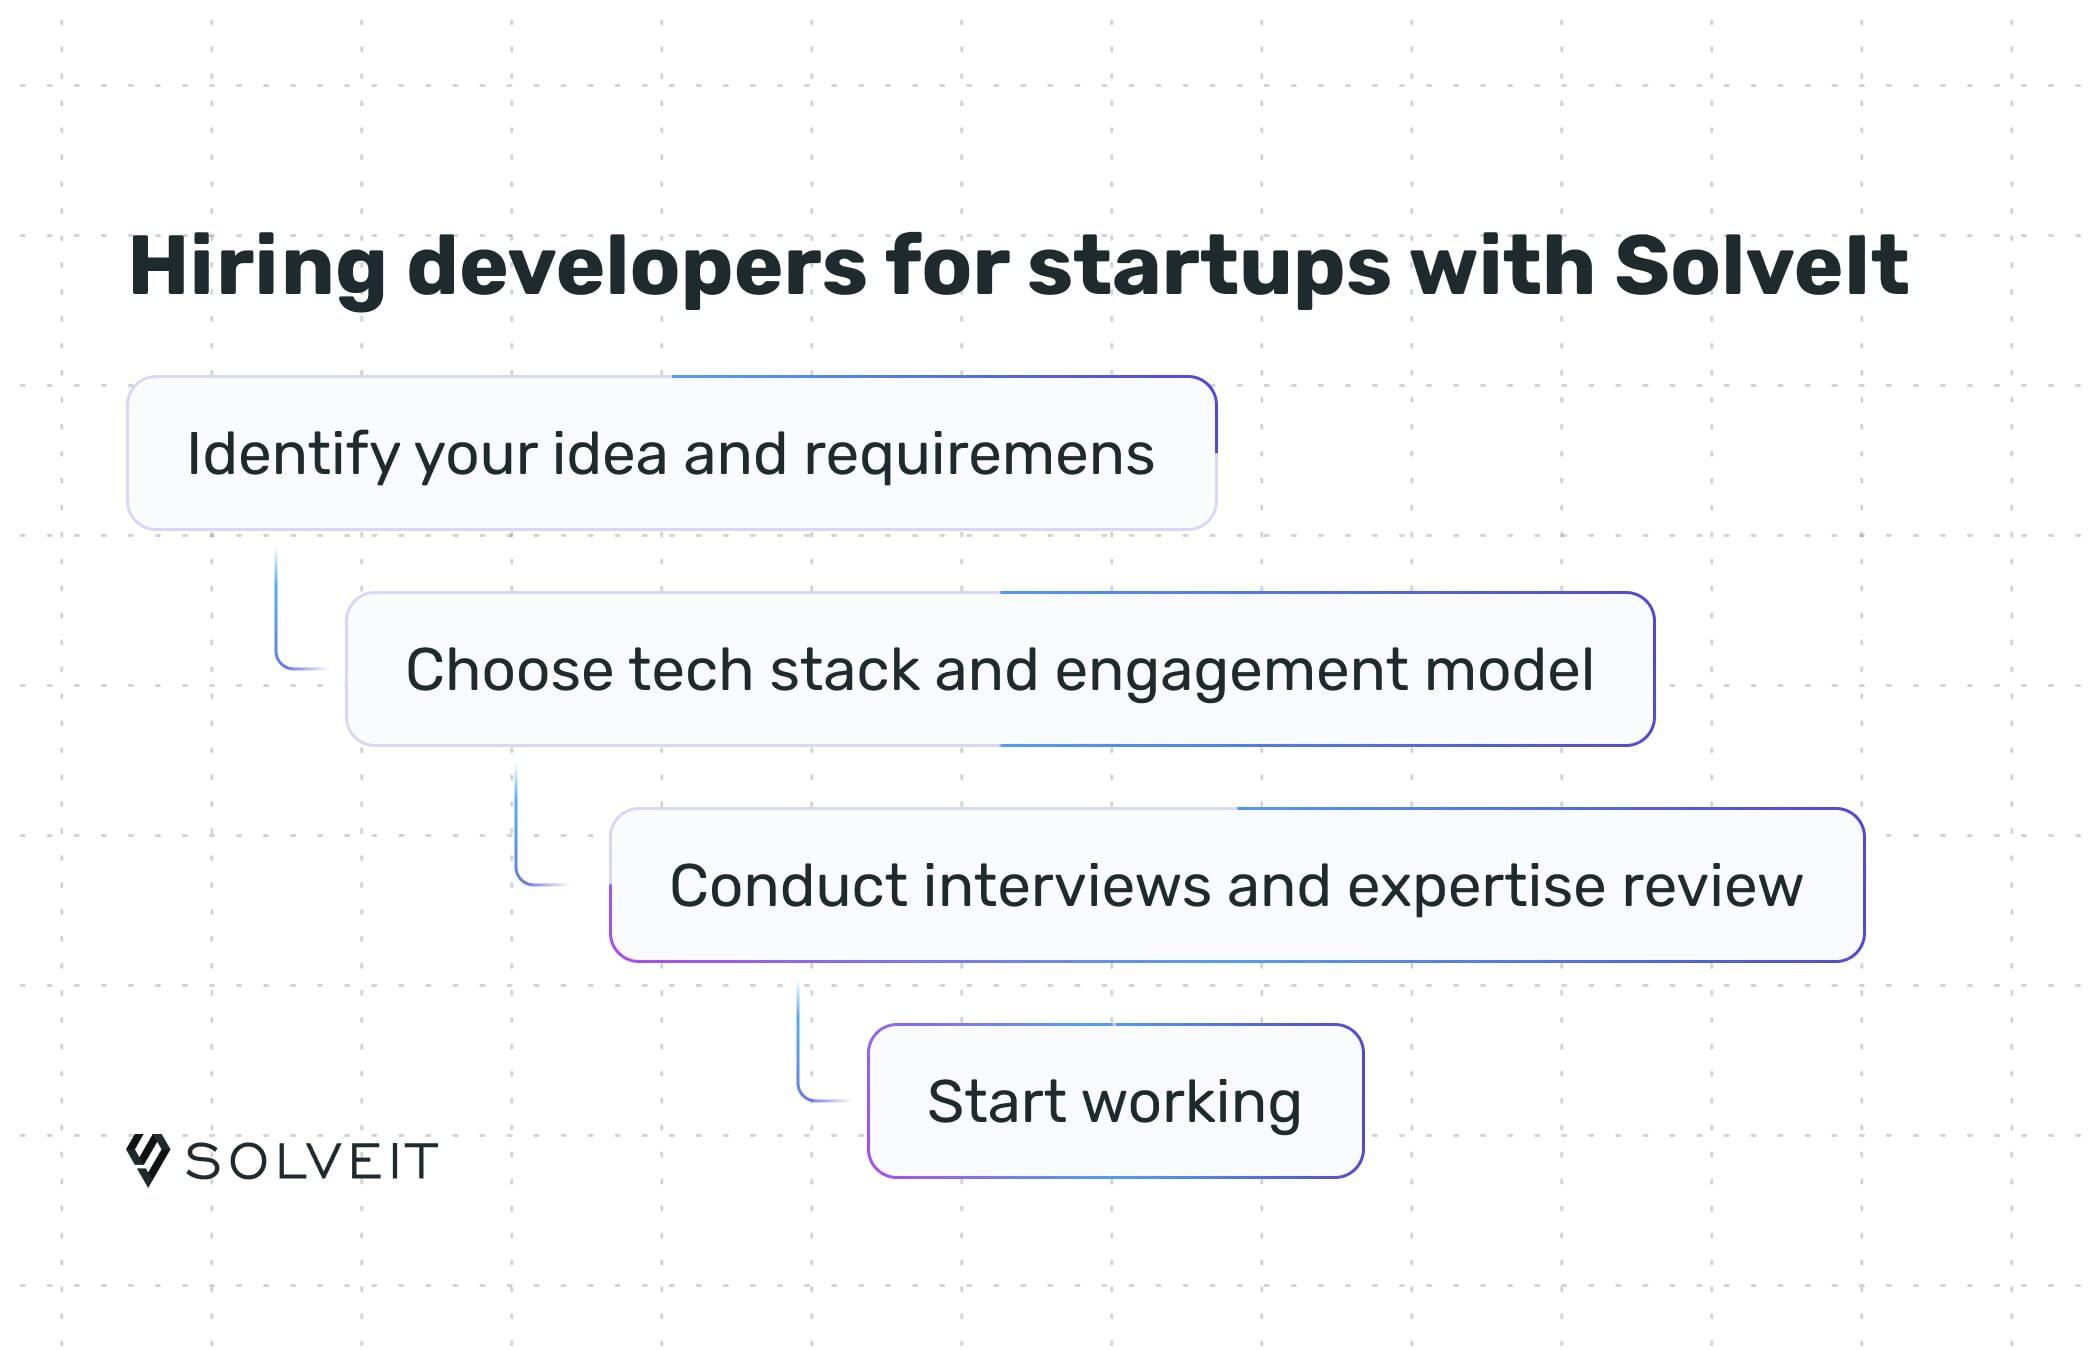 How to hire developers for a startup: step-by-step process